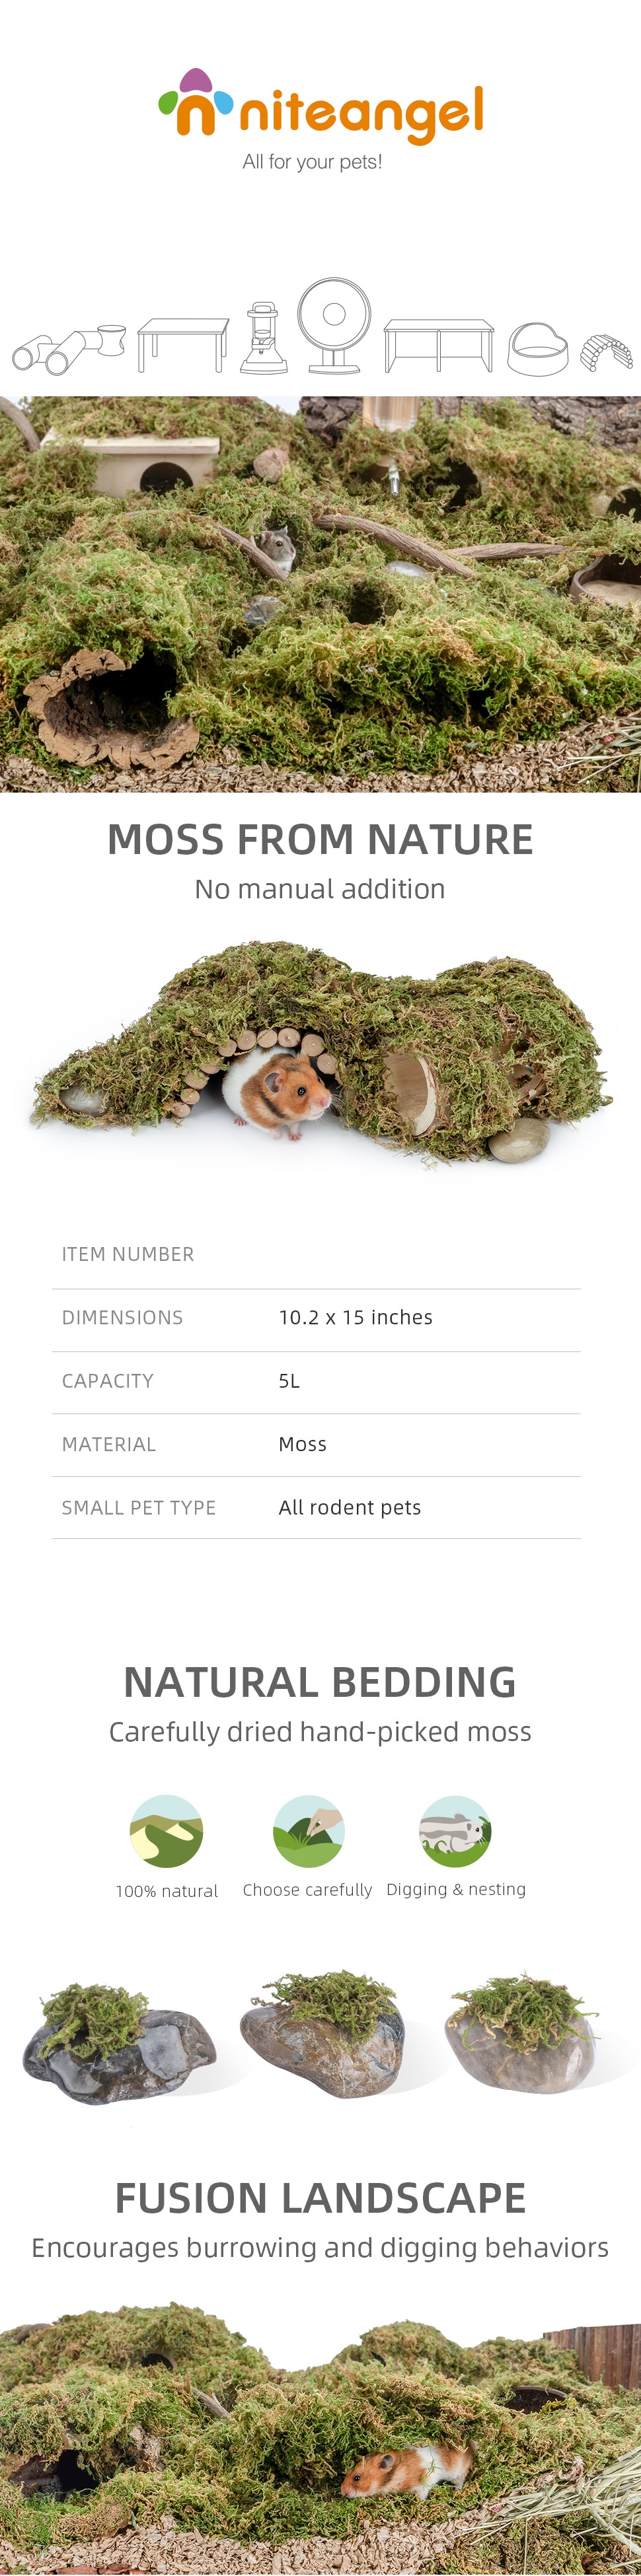 Riare 25qt Natural Hamster Moss Bedding Nesting-Soft Forest Moss Hamster Habitat Reptile Moss for Dwarf Syrian Hamsters, Mices, Gerbils, Reptiles